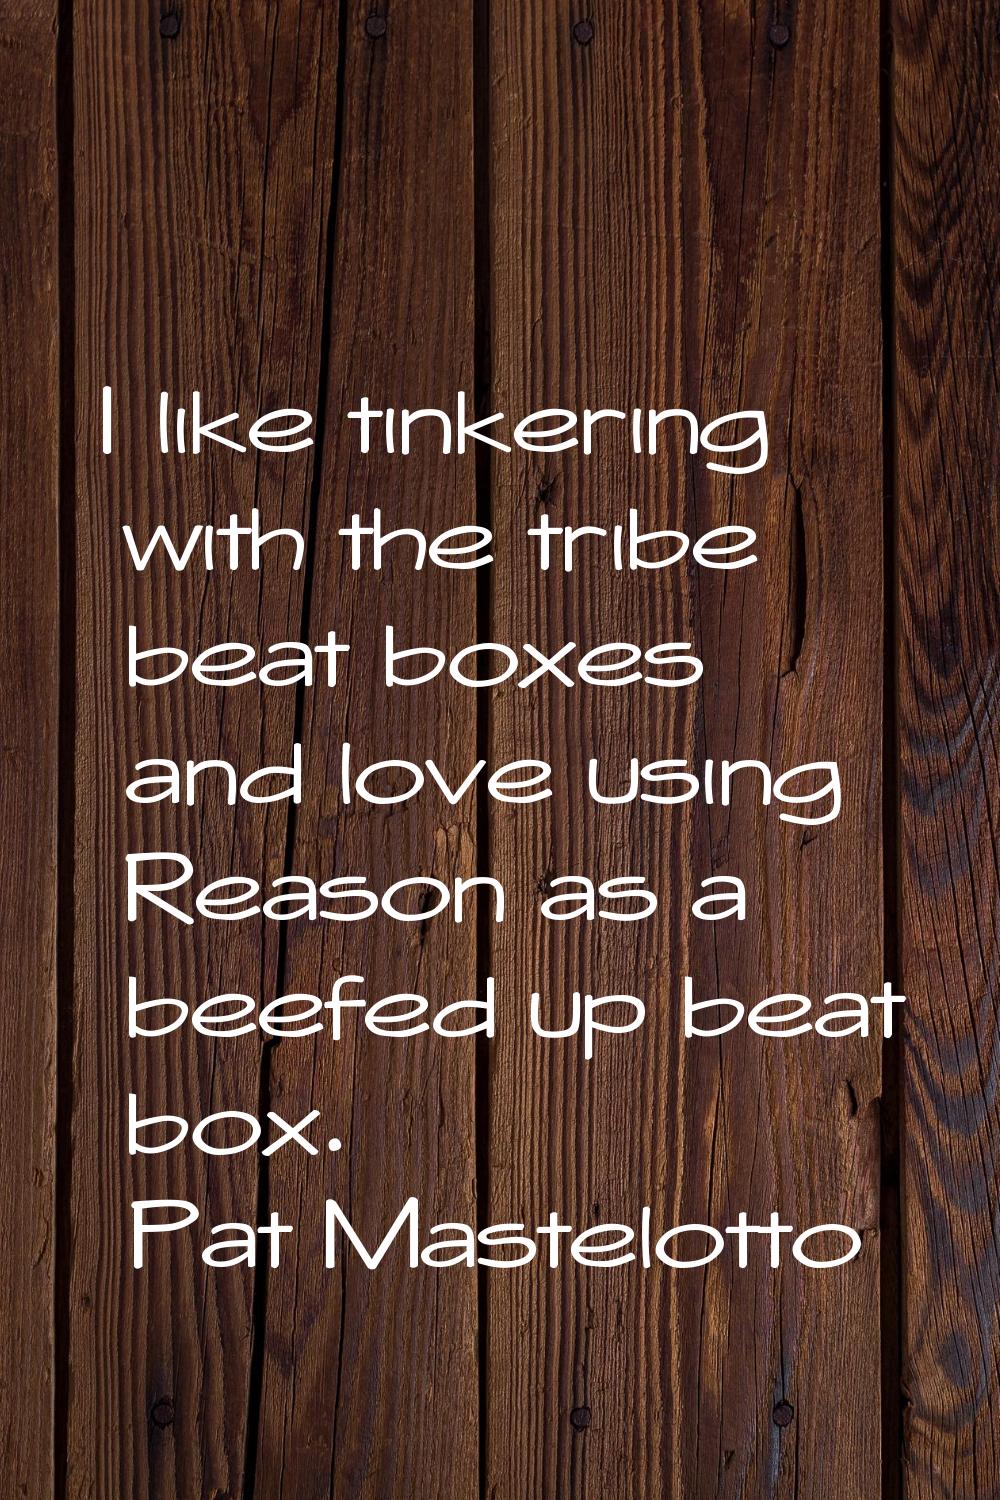 I like tinkering with the tribe beat boxes and love using Reason as a beefed up beat box.